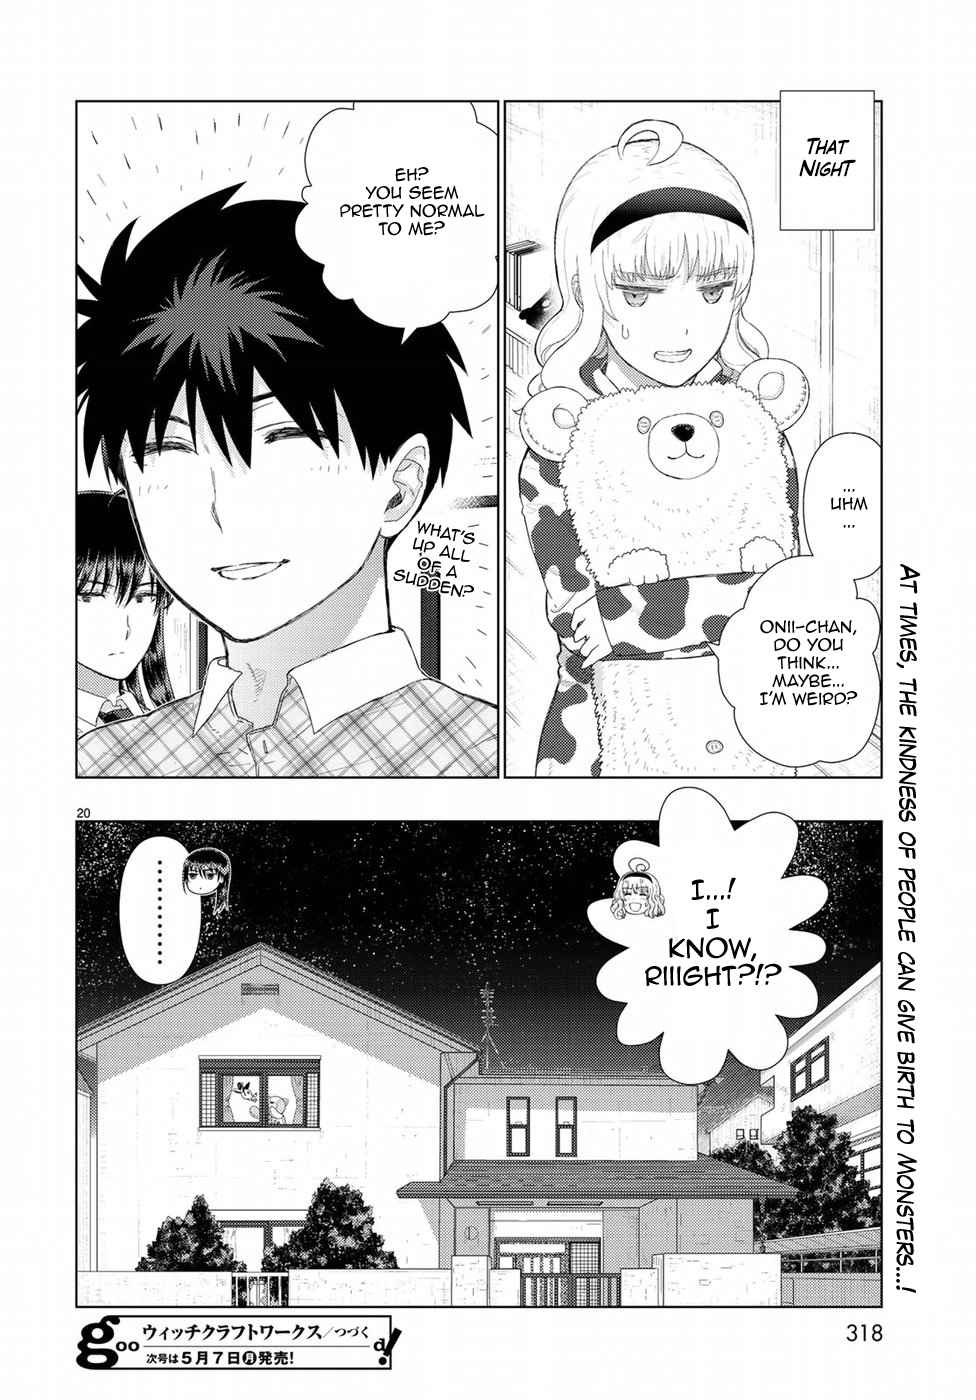 Witch Craft Works Ch. 72 Takamiya kun and His Little Sister's Friends